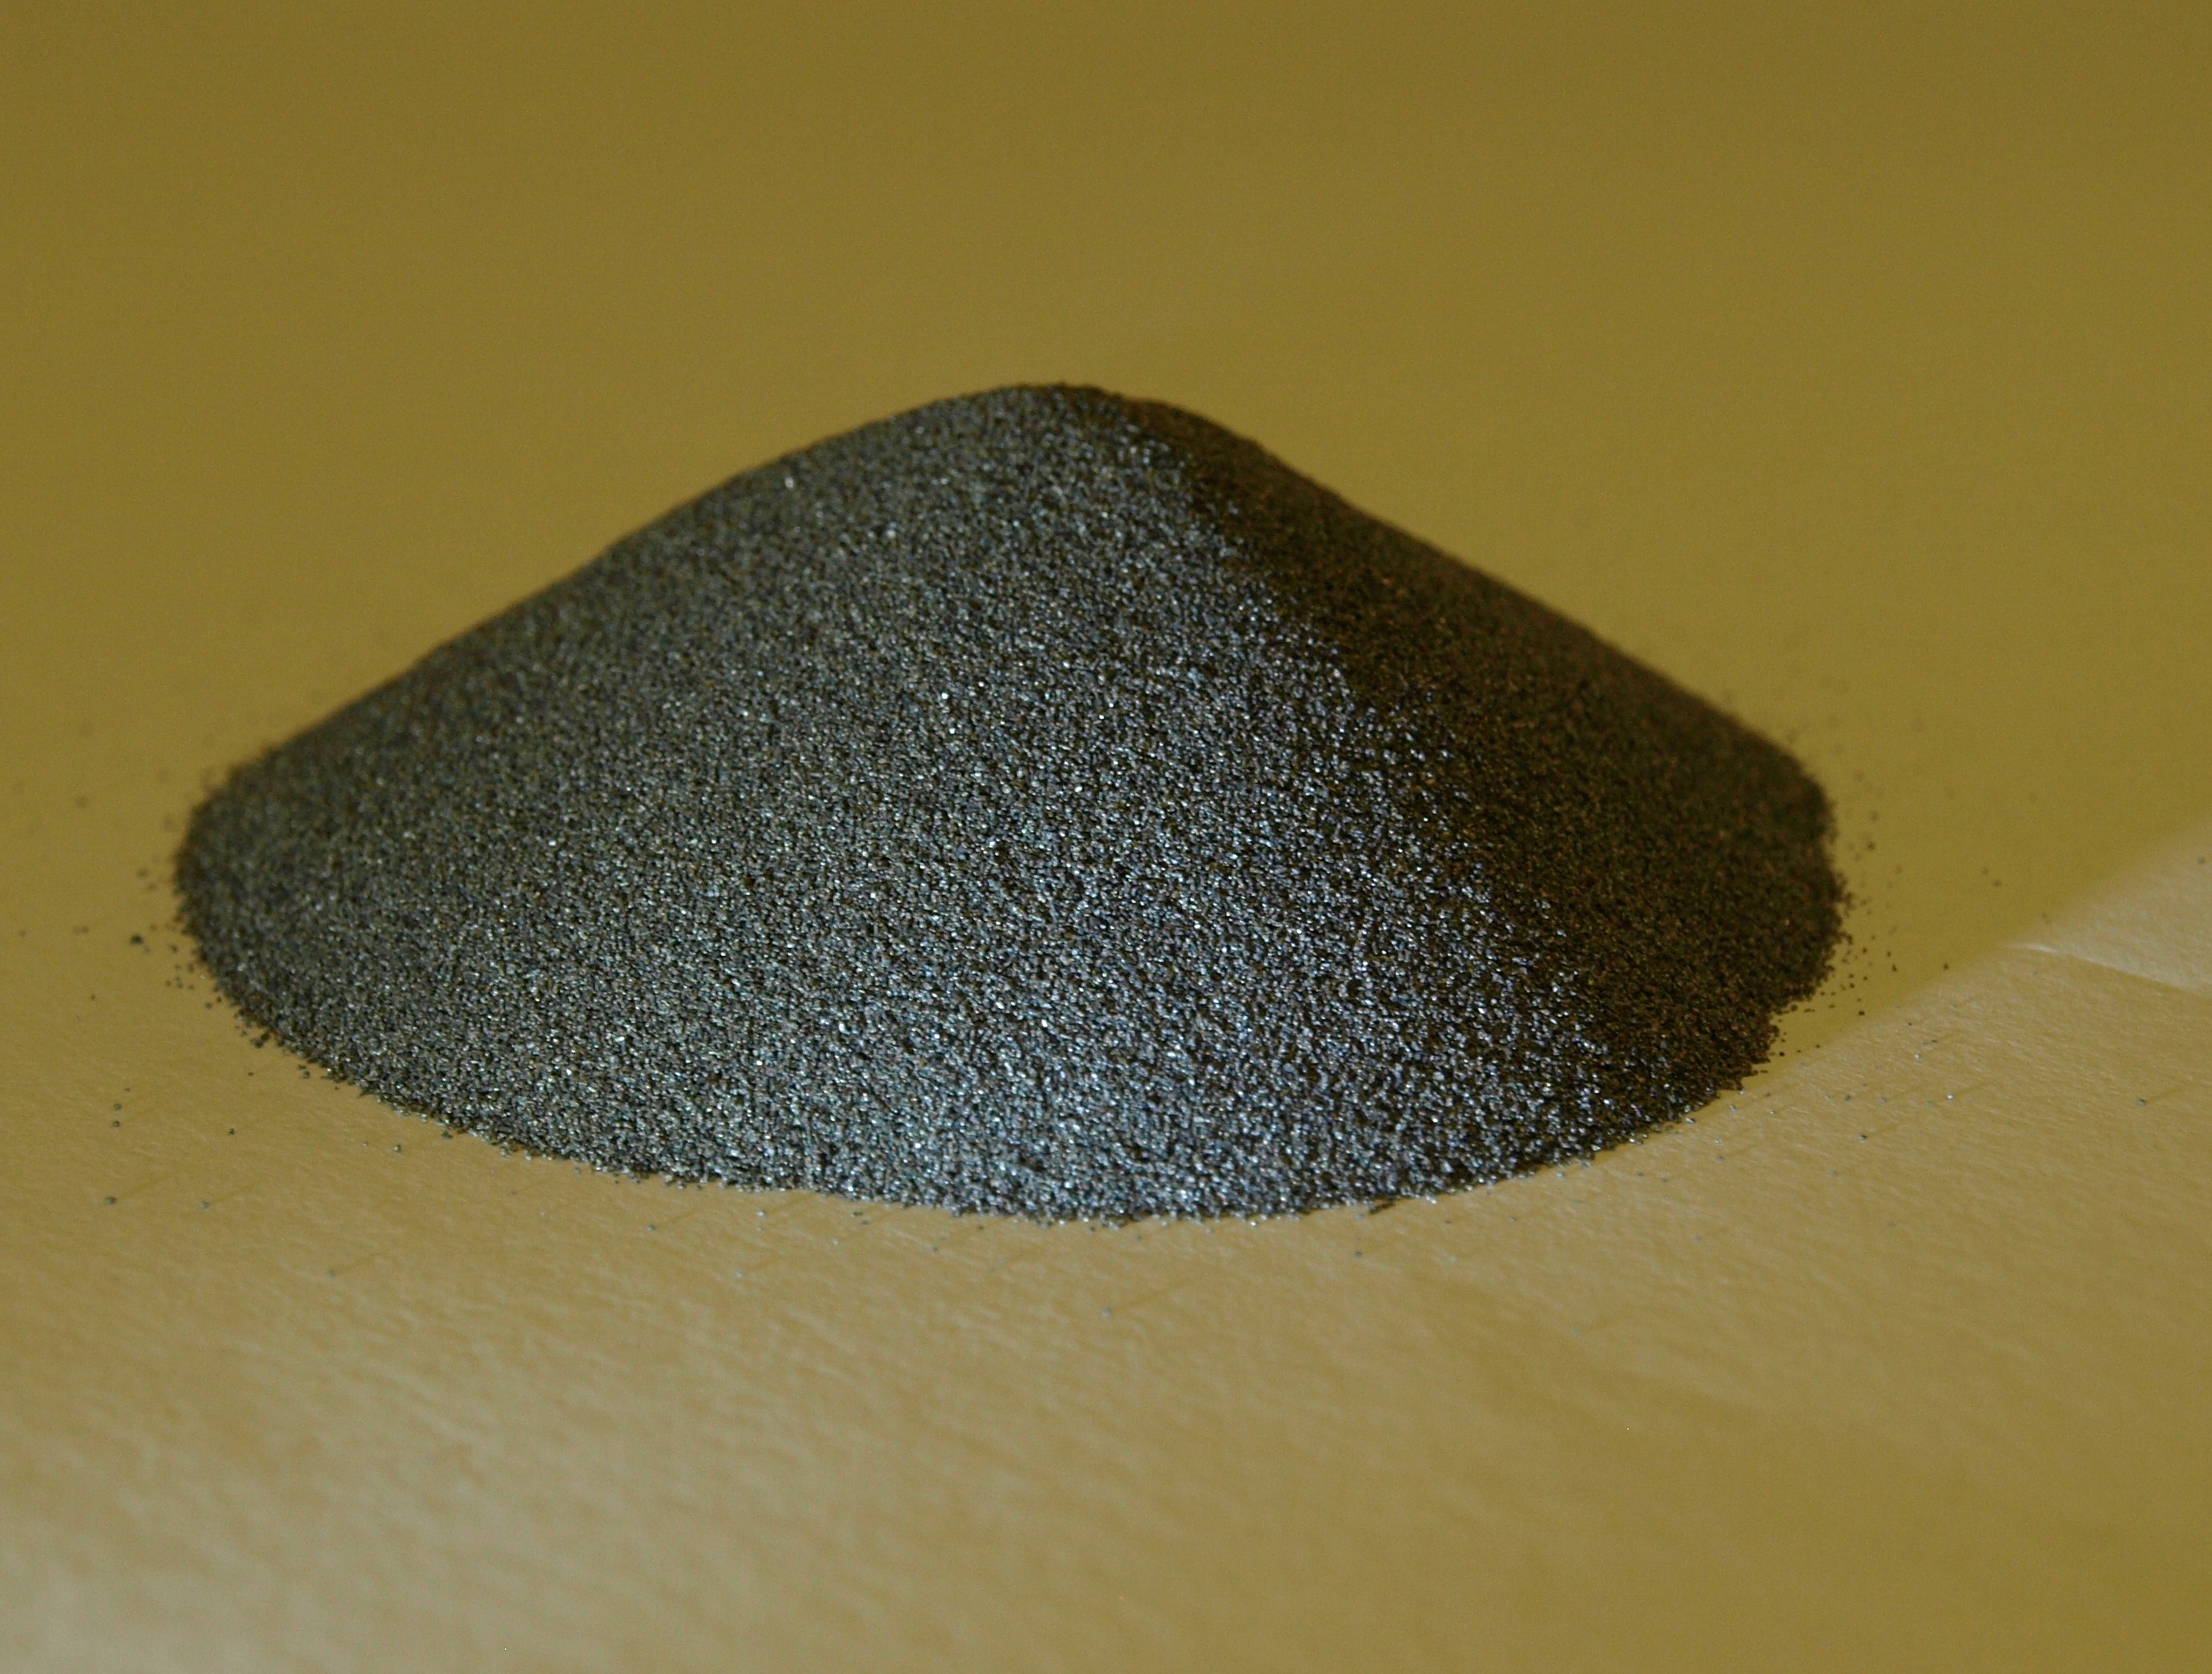 Metalysis’ technology produces metal powders at lower cost with reduced environmental impact.